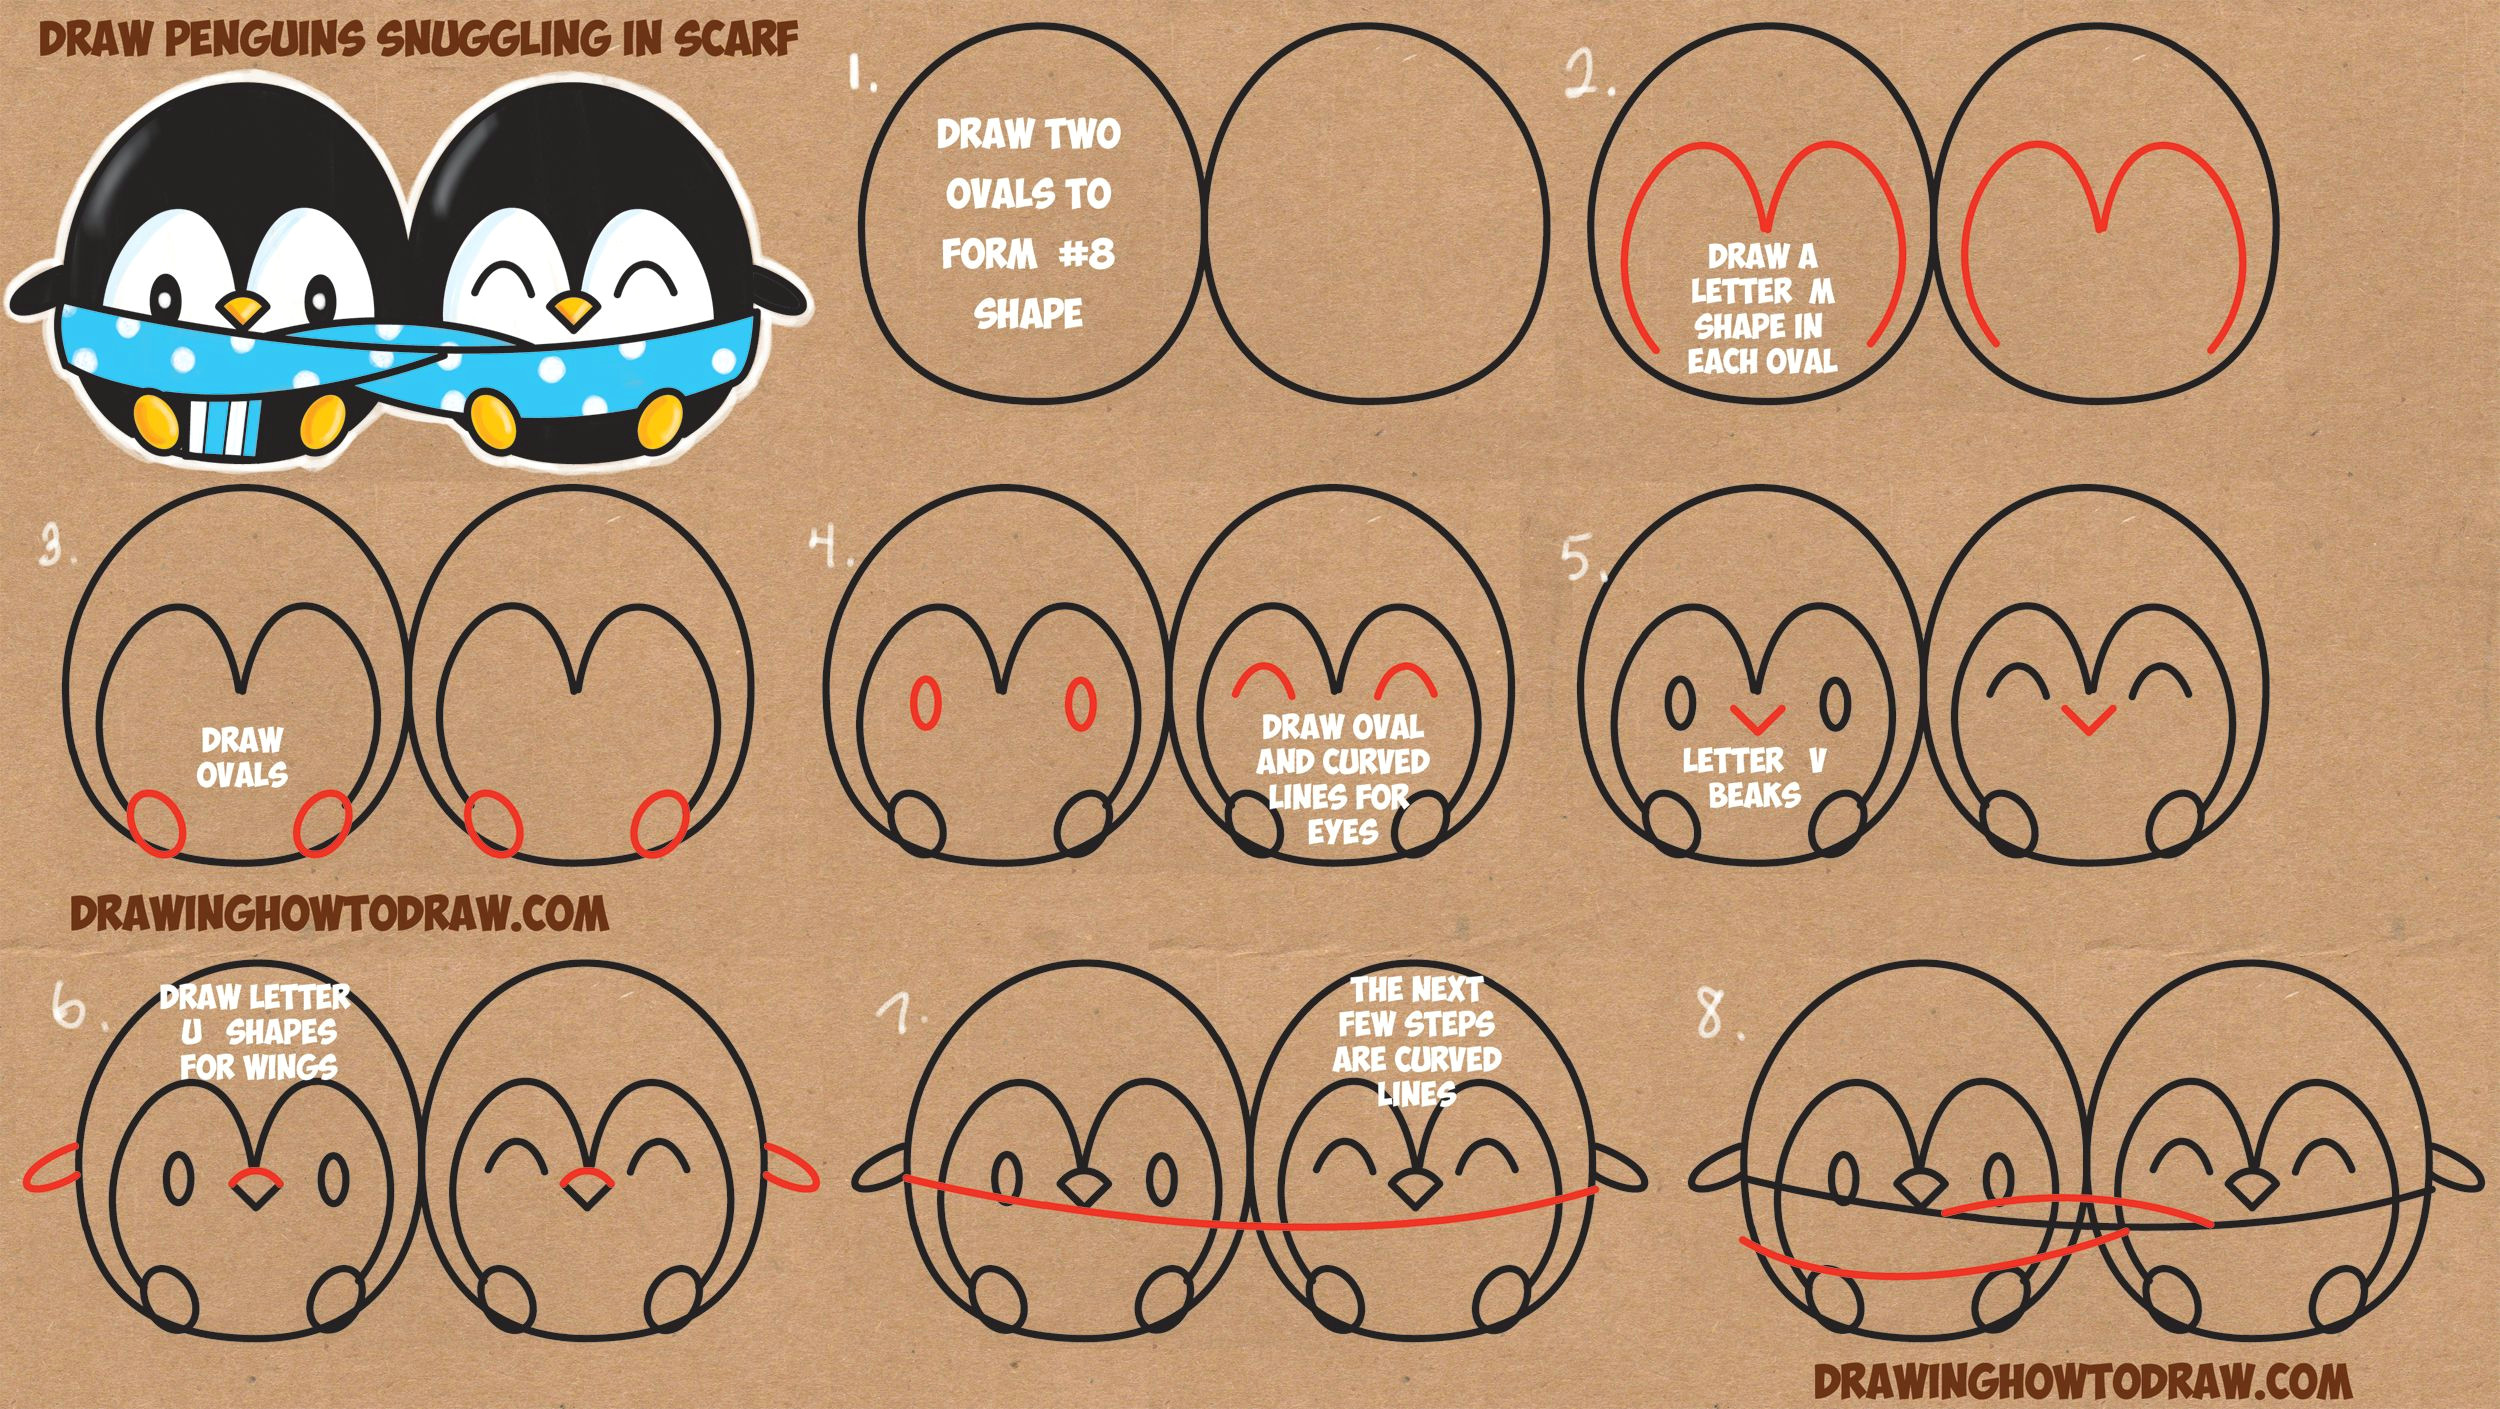 Drawing Cartoon Wings How to Draw Cute Kawaii Chibi Cartoon Penguins In A Scarf for